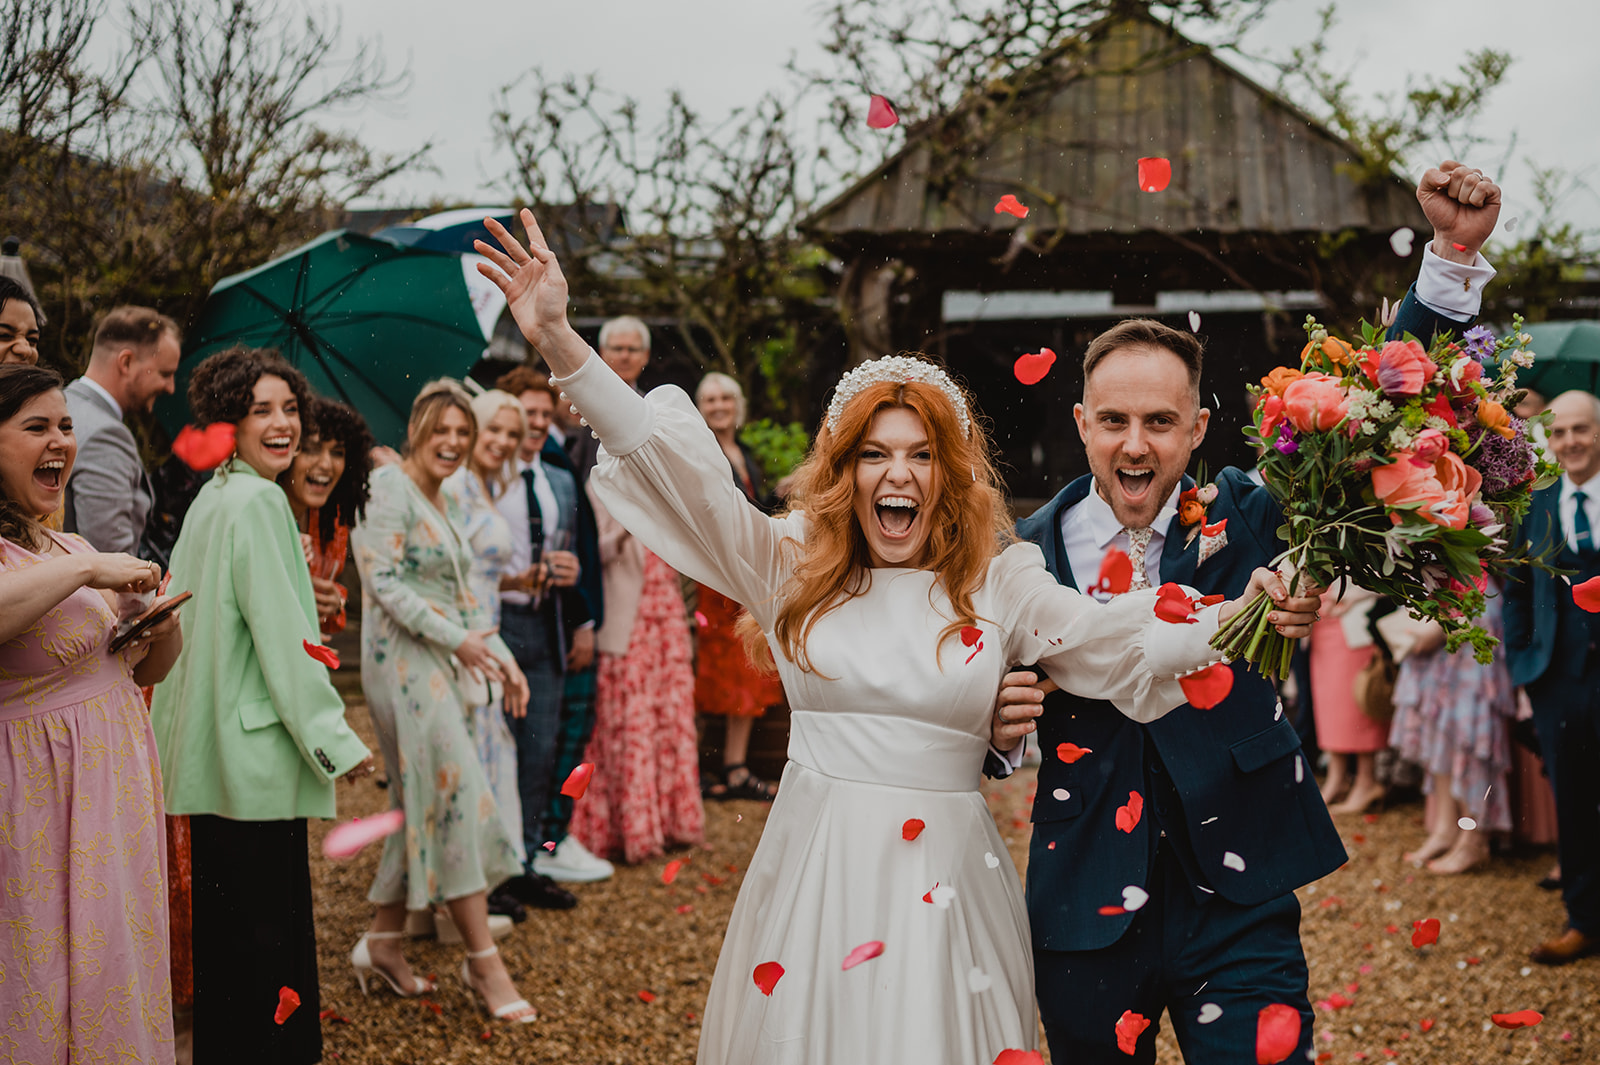 A couple celebrate during the throwing of confetti at South Farm wedding venue